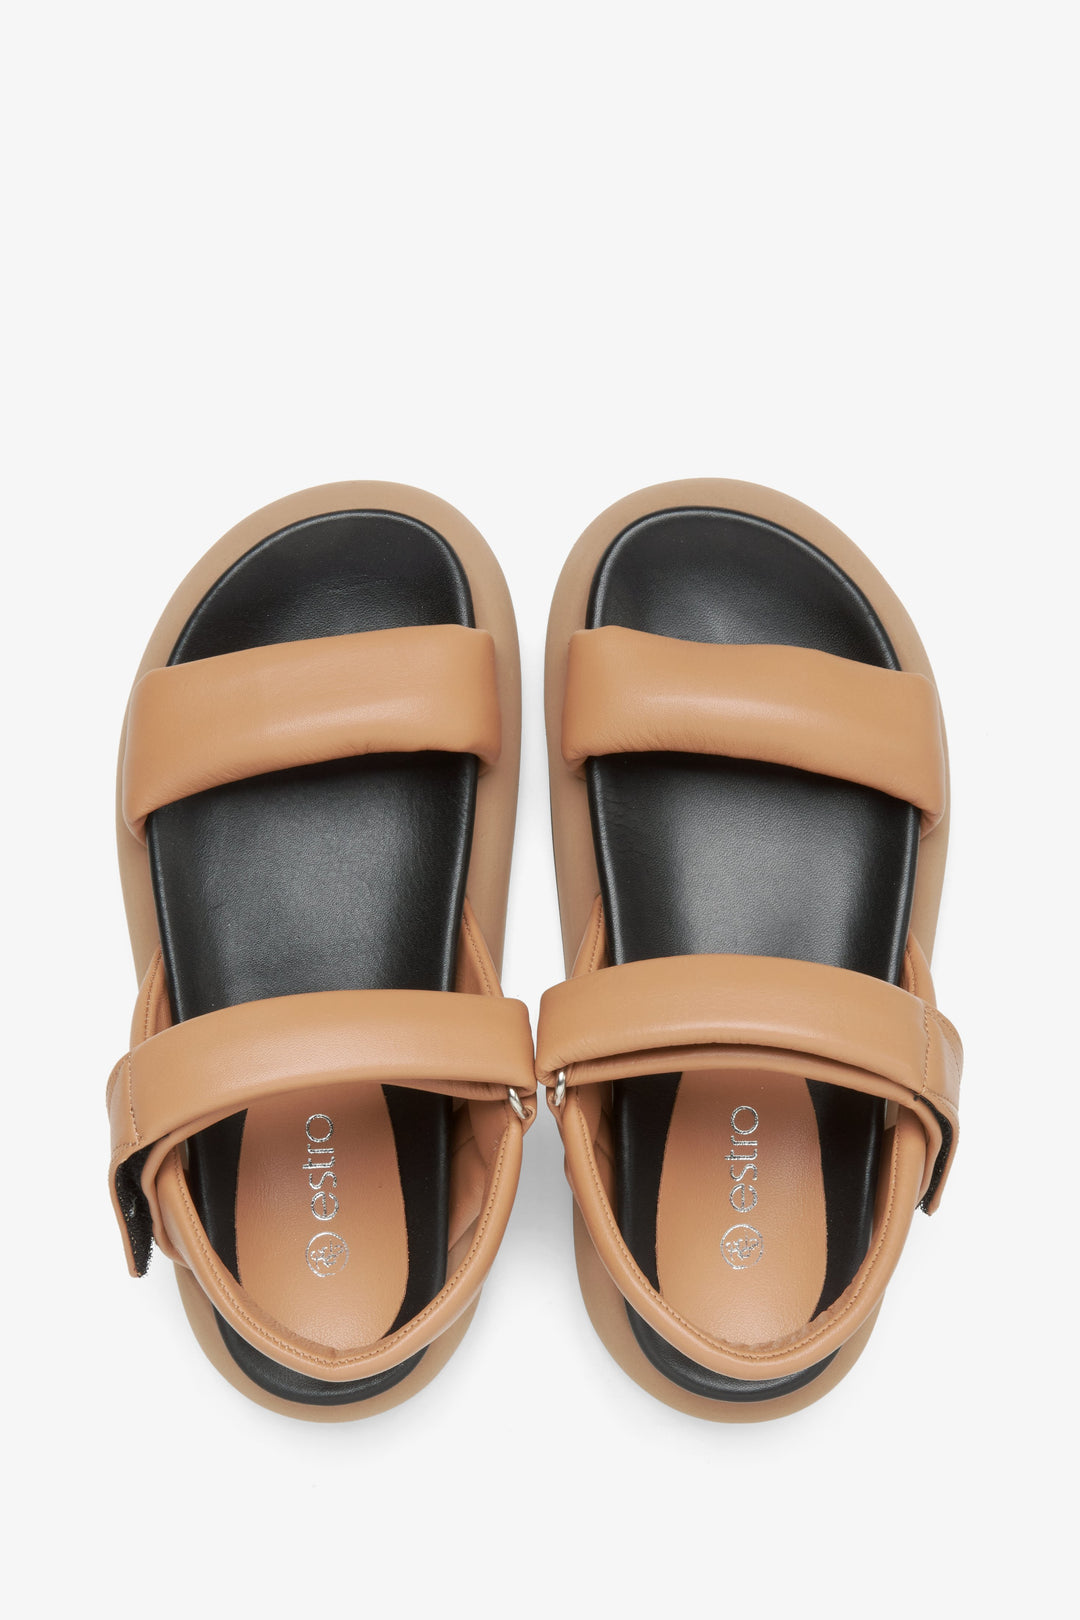 Women's brown sandals with a soft sole by Estro - top view presentation of the model.